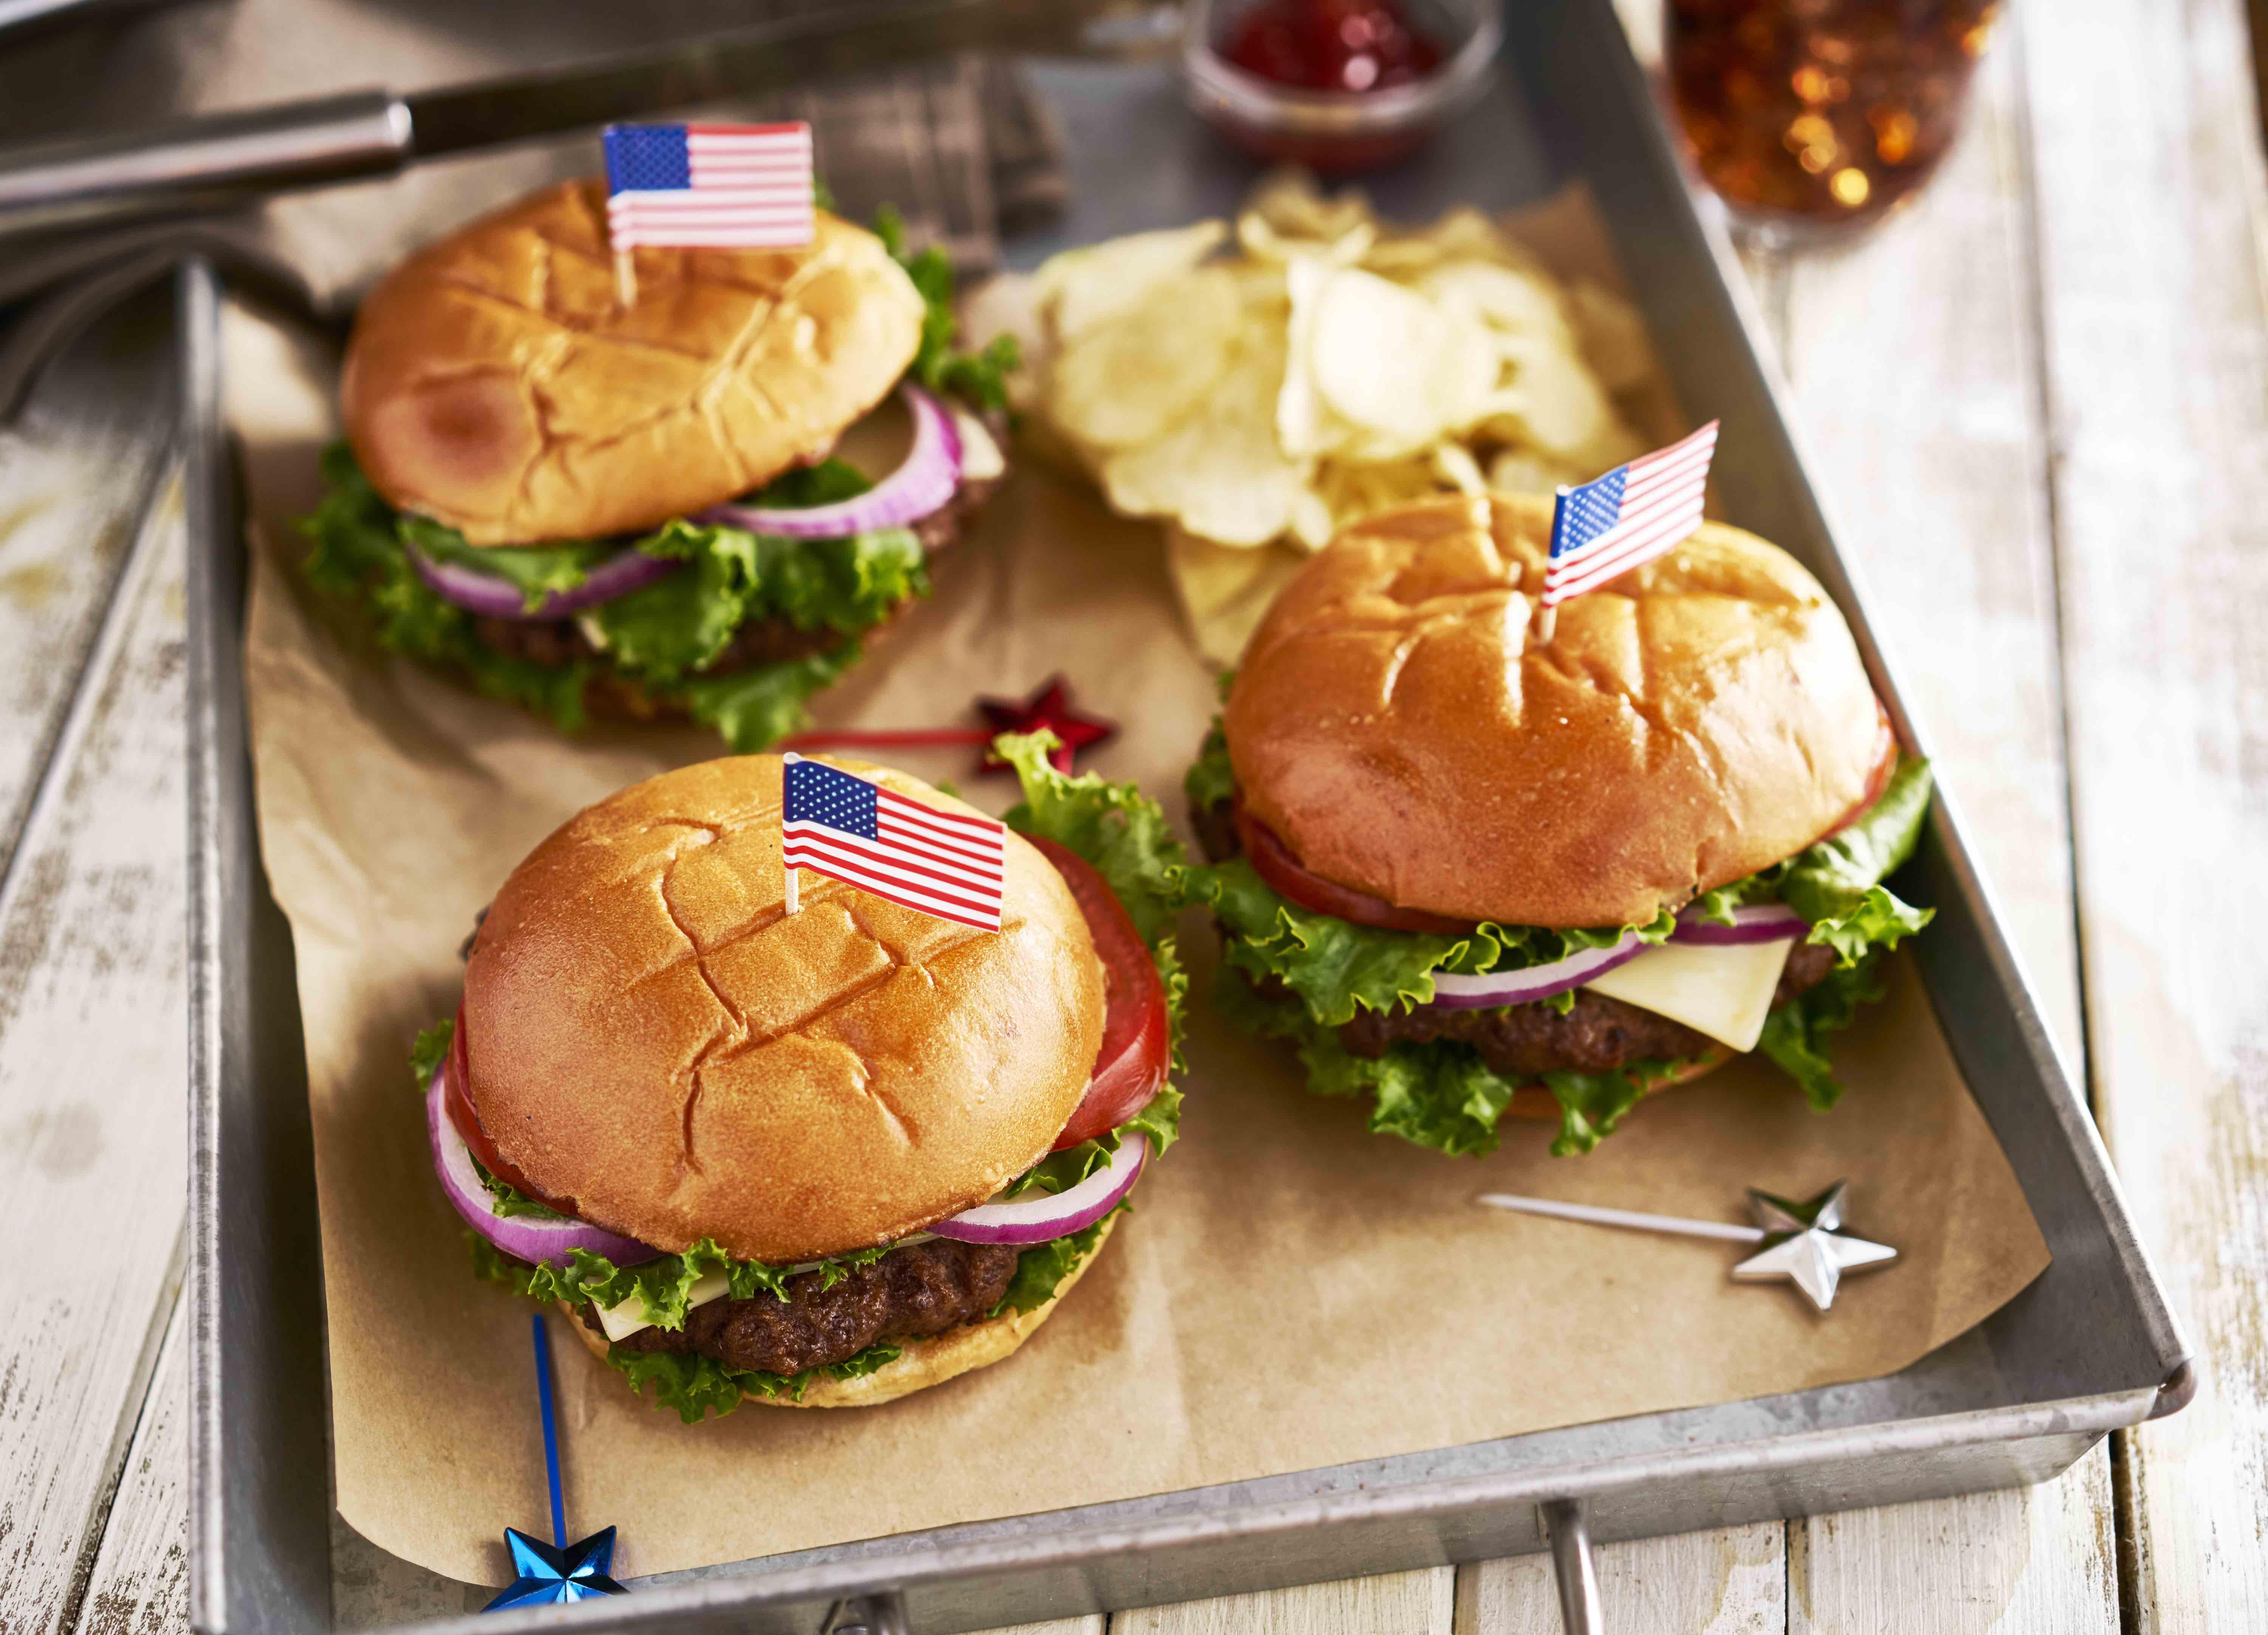 Patriotic burgers for the 4th of July.